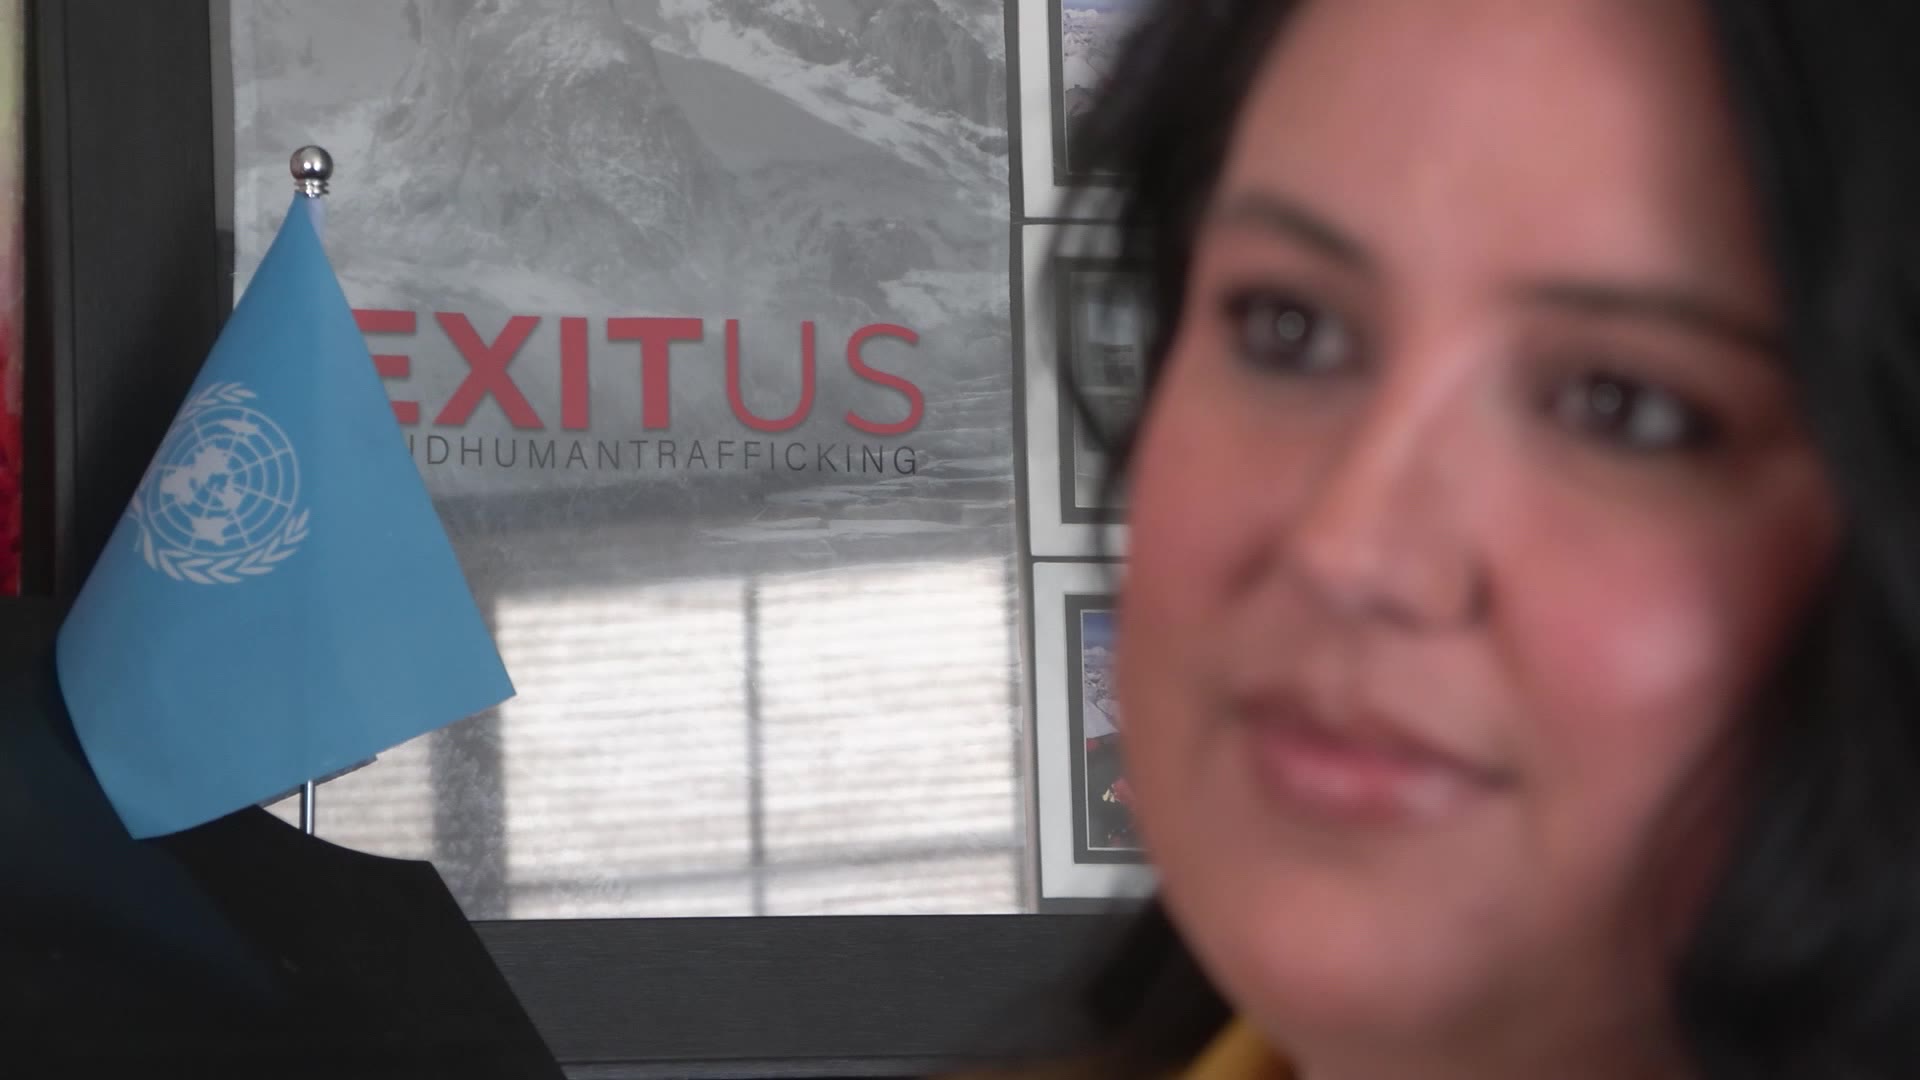 Candace Elexzandria Lierd speaking to KSL TV about the NBA All-Star Event 2023 with the Exitus logo...